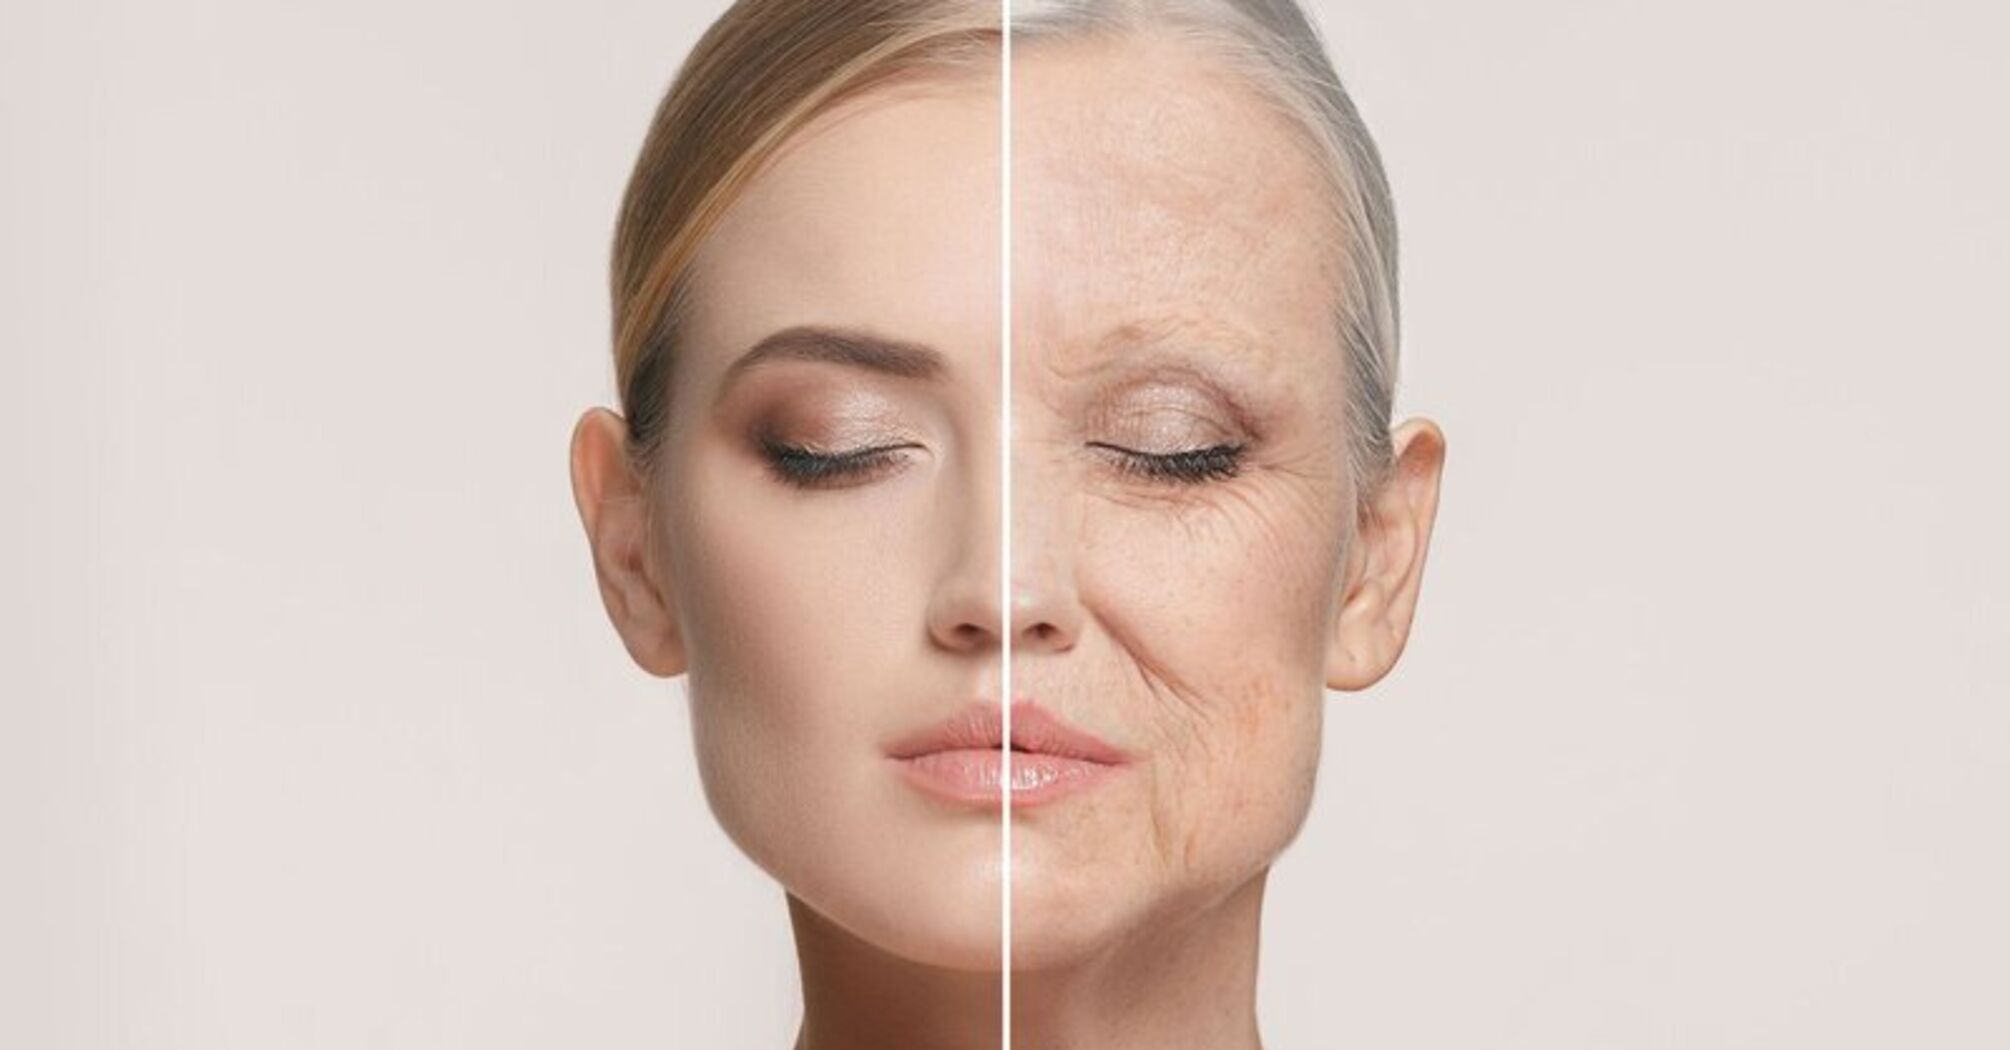 How to slow down the aging process